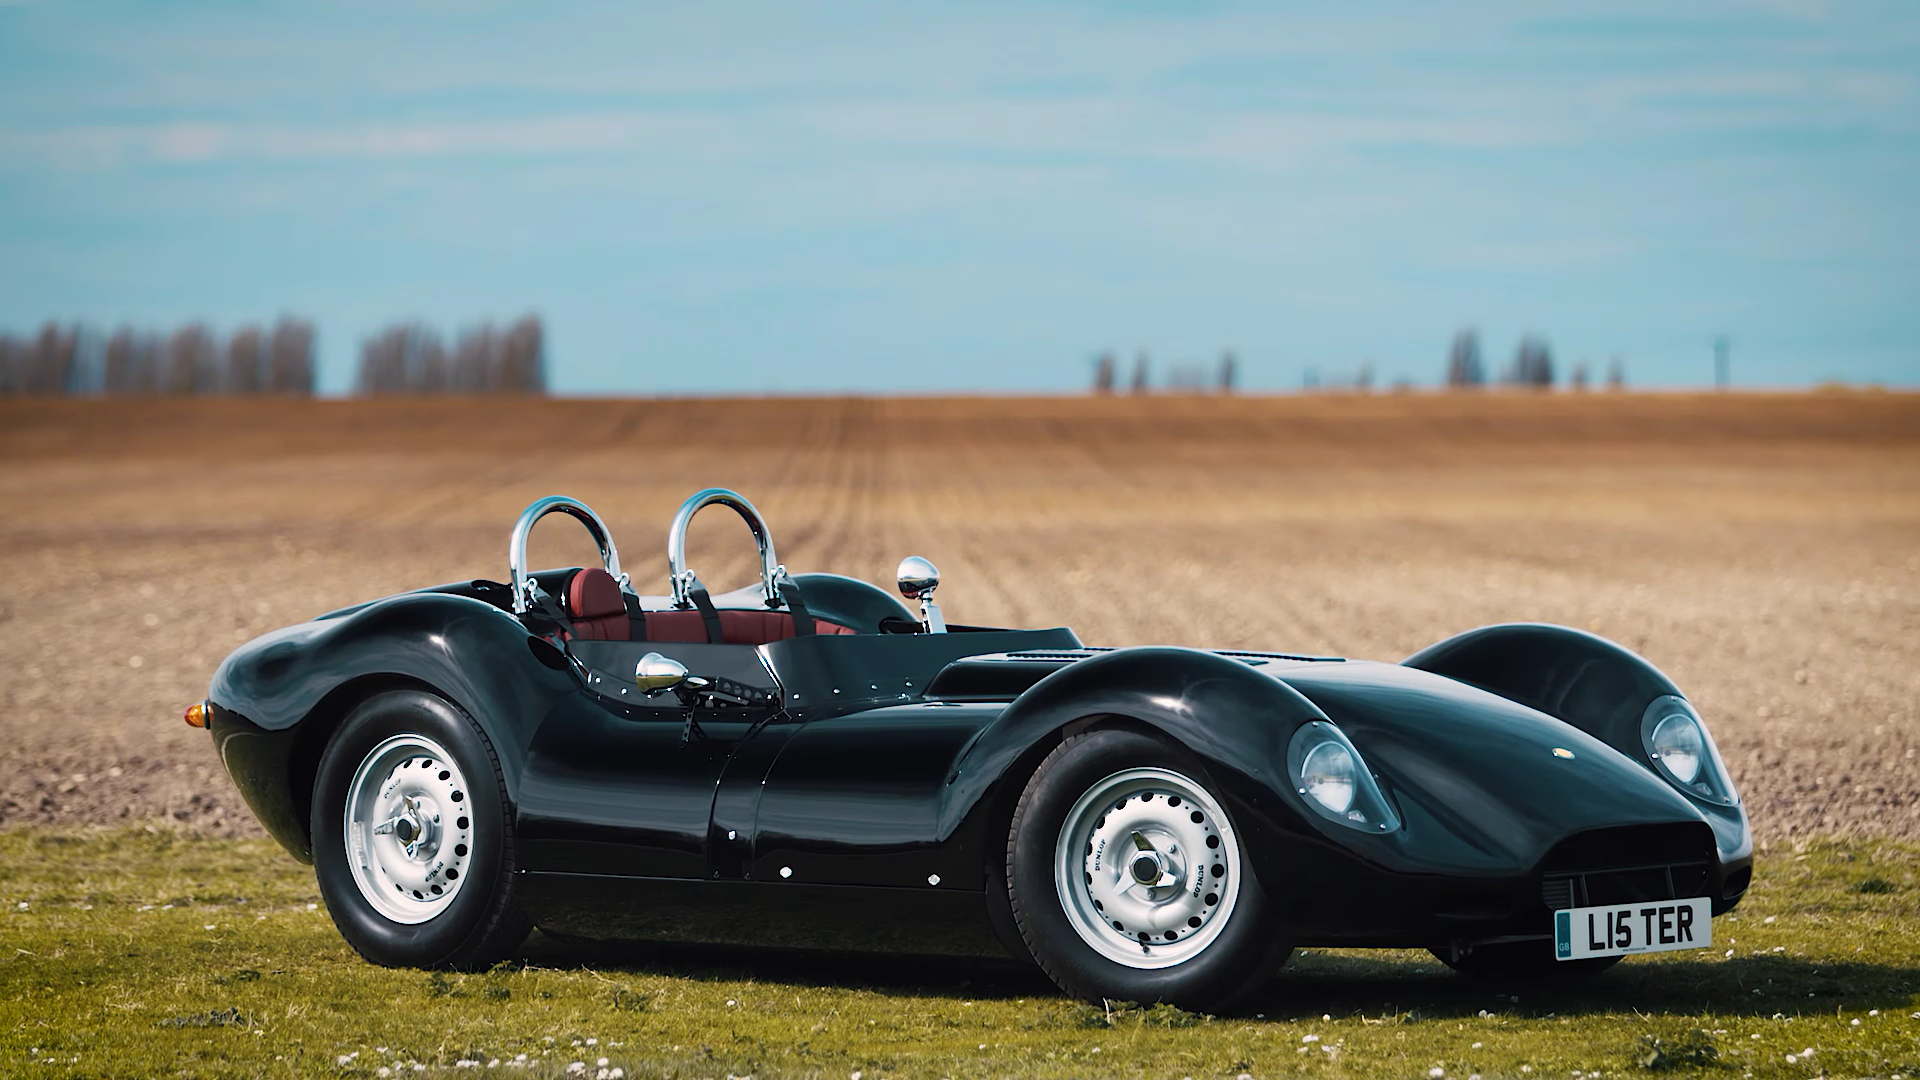 1958 lister knobbly contination made for customer with wheel spinners